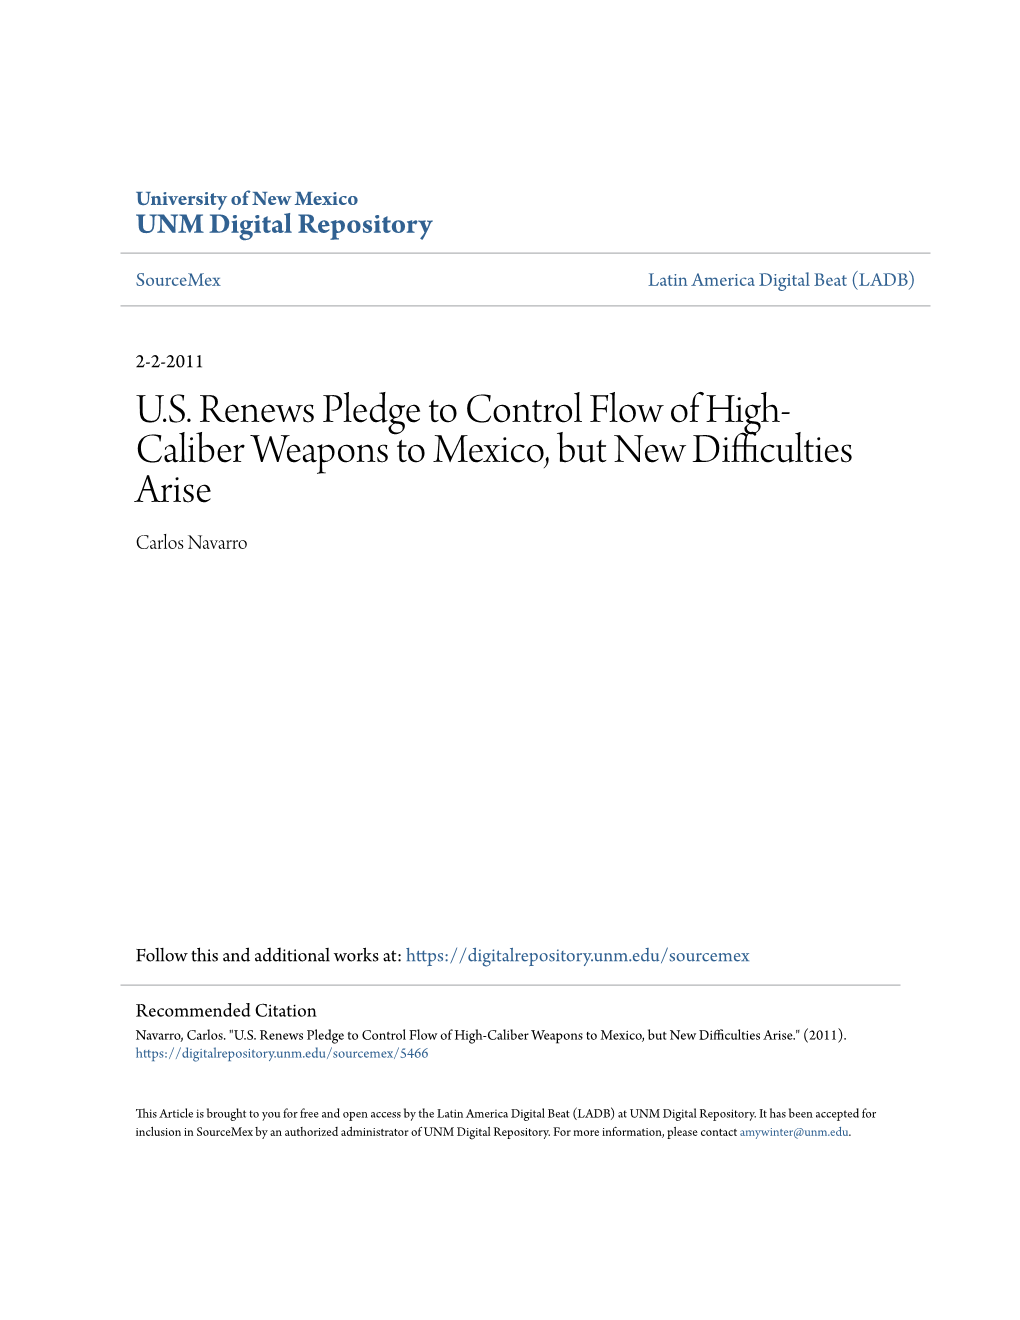 U.S. Renews Pledge to Control Flow of High-Caliber Weapons to Mexico, but New Difficulties Arise." (2011)